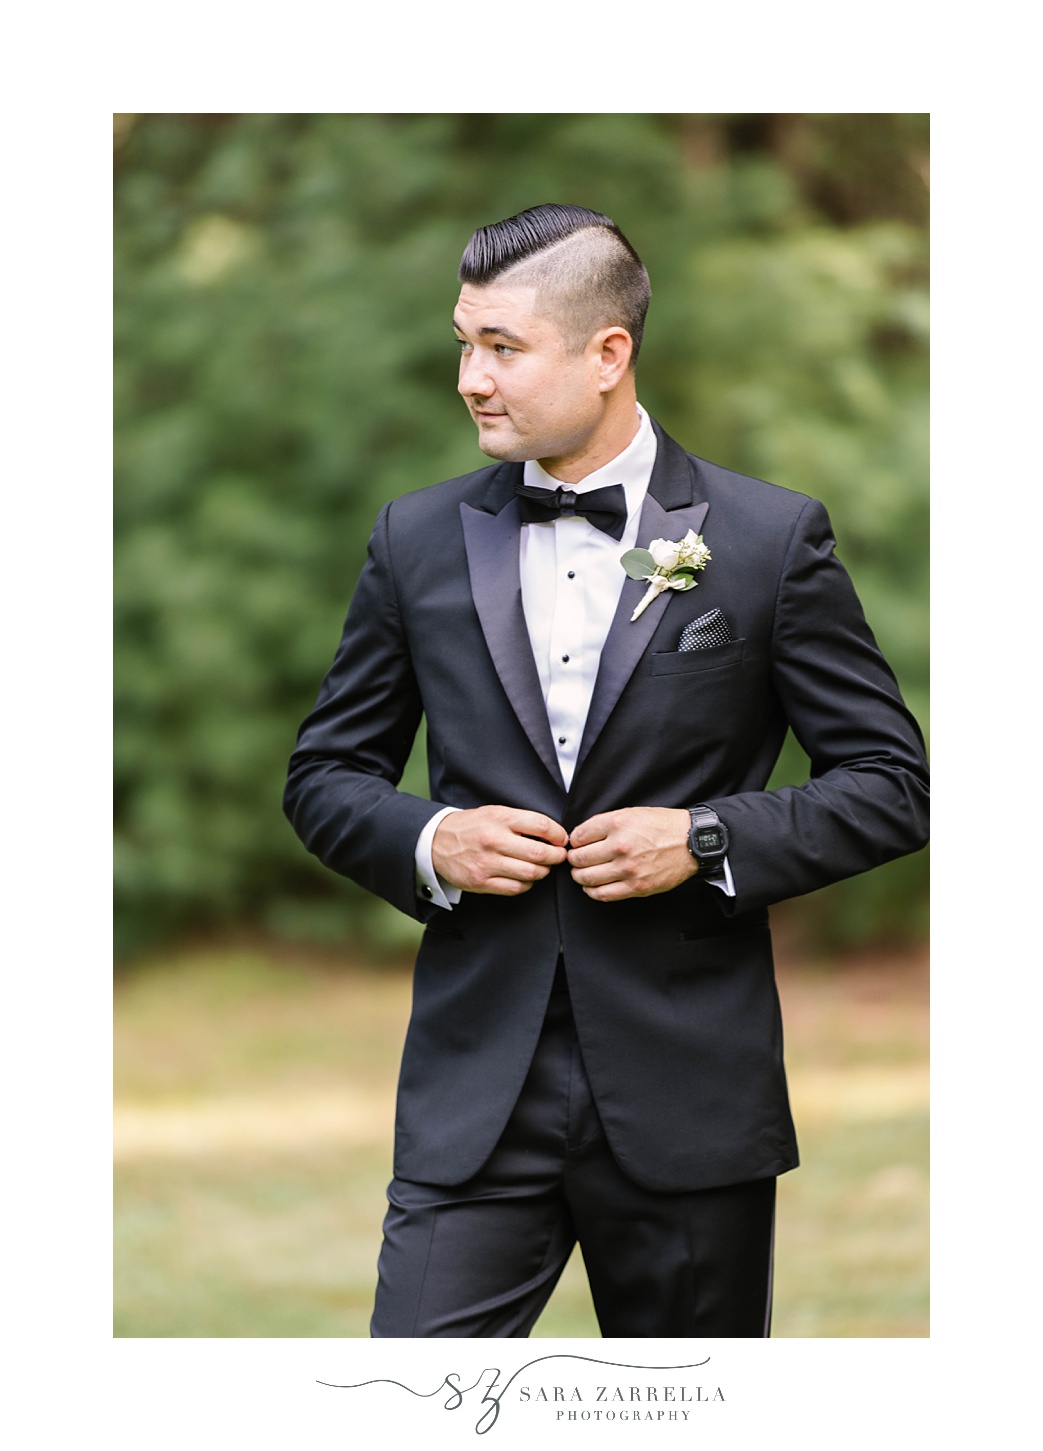 groom buttons on classic tux jacket before Lakeview Pavilion wedding